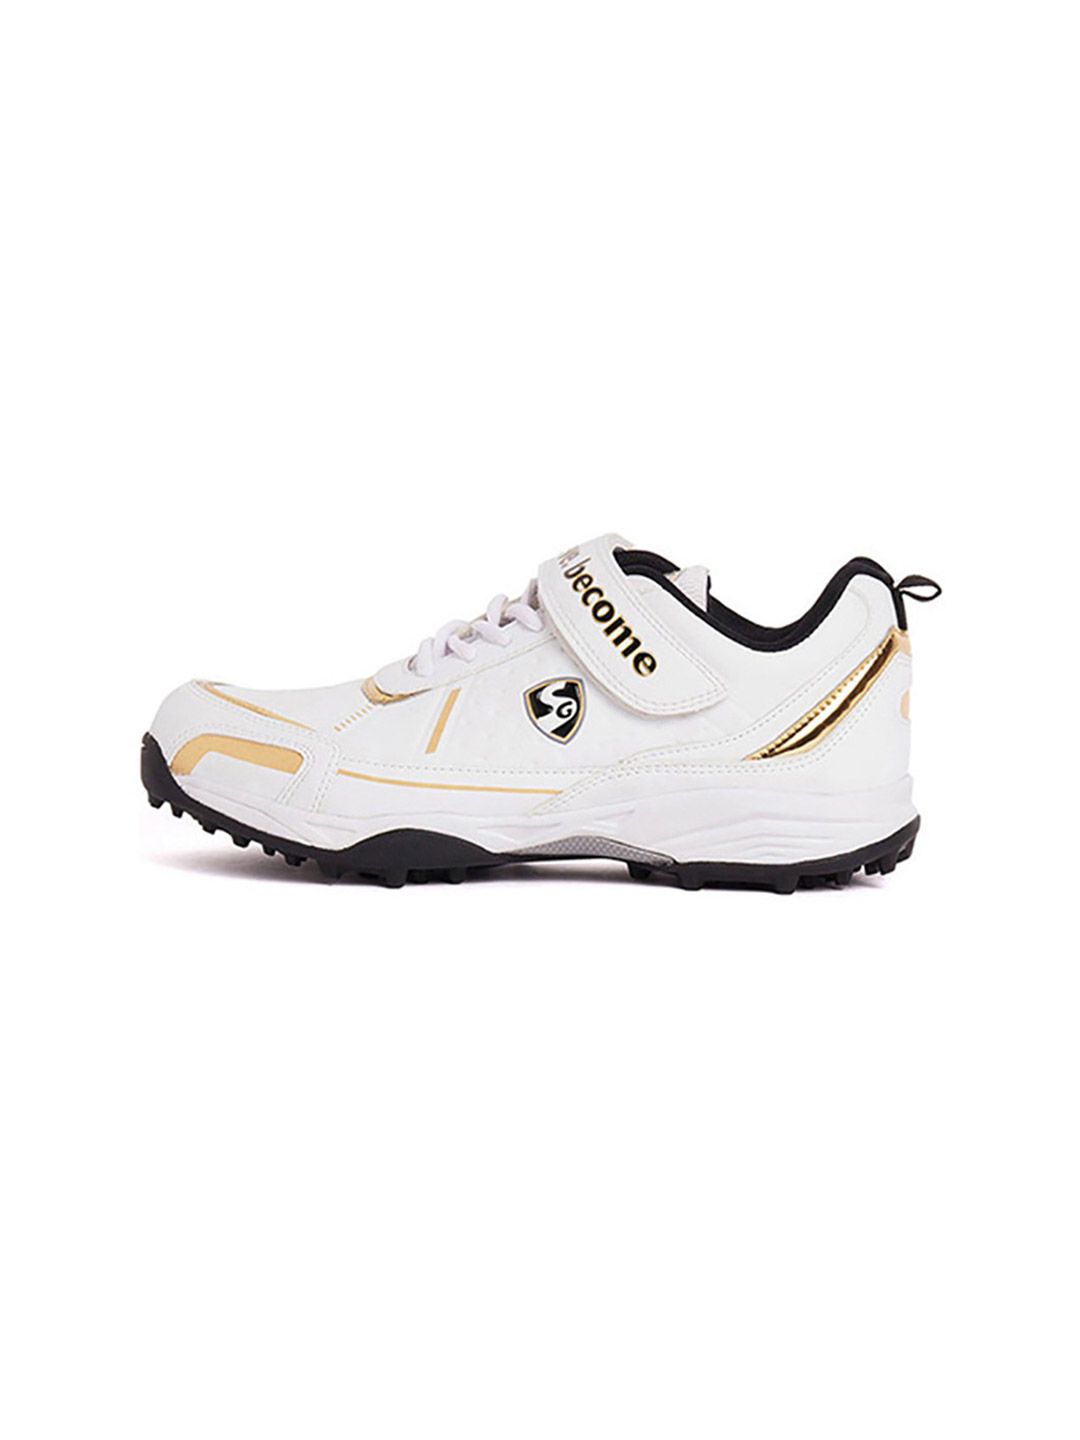 Century 5.0 Gold And Black Mens Sports Shoes